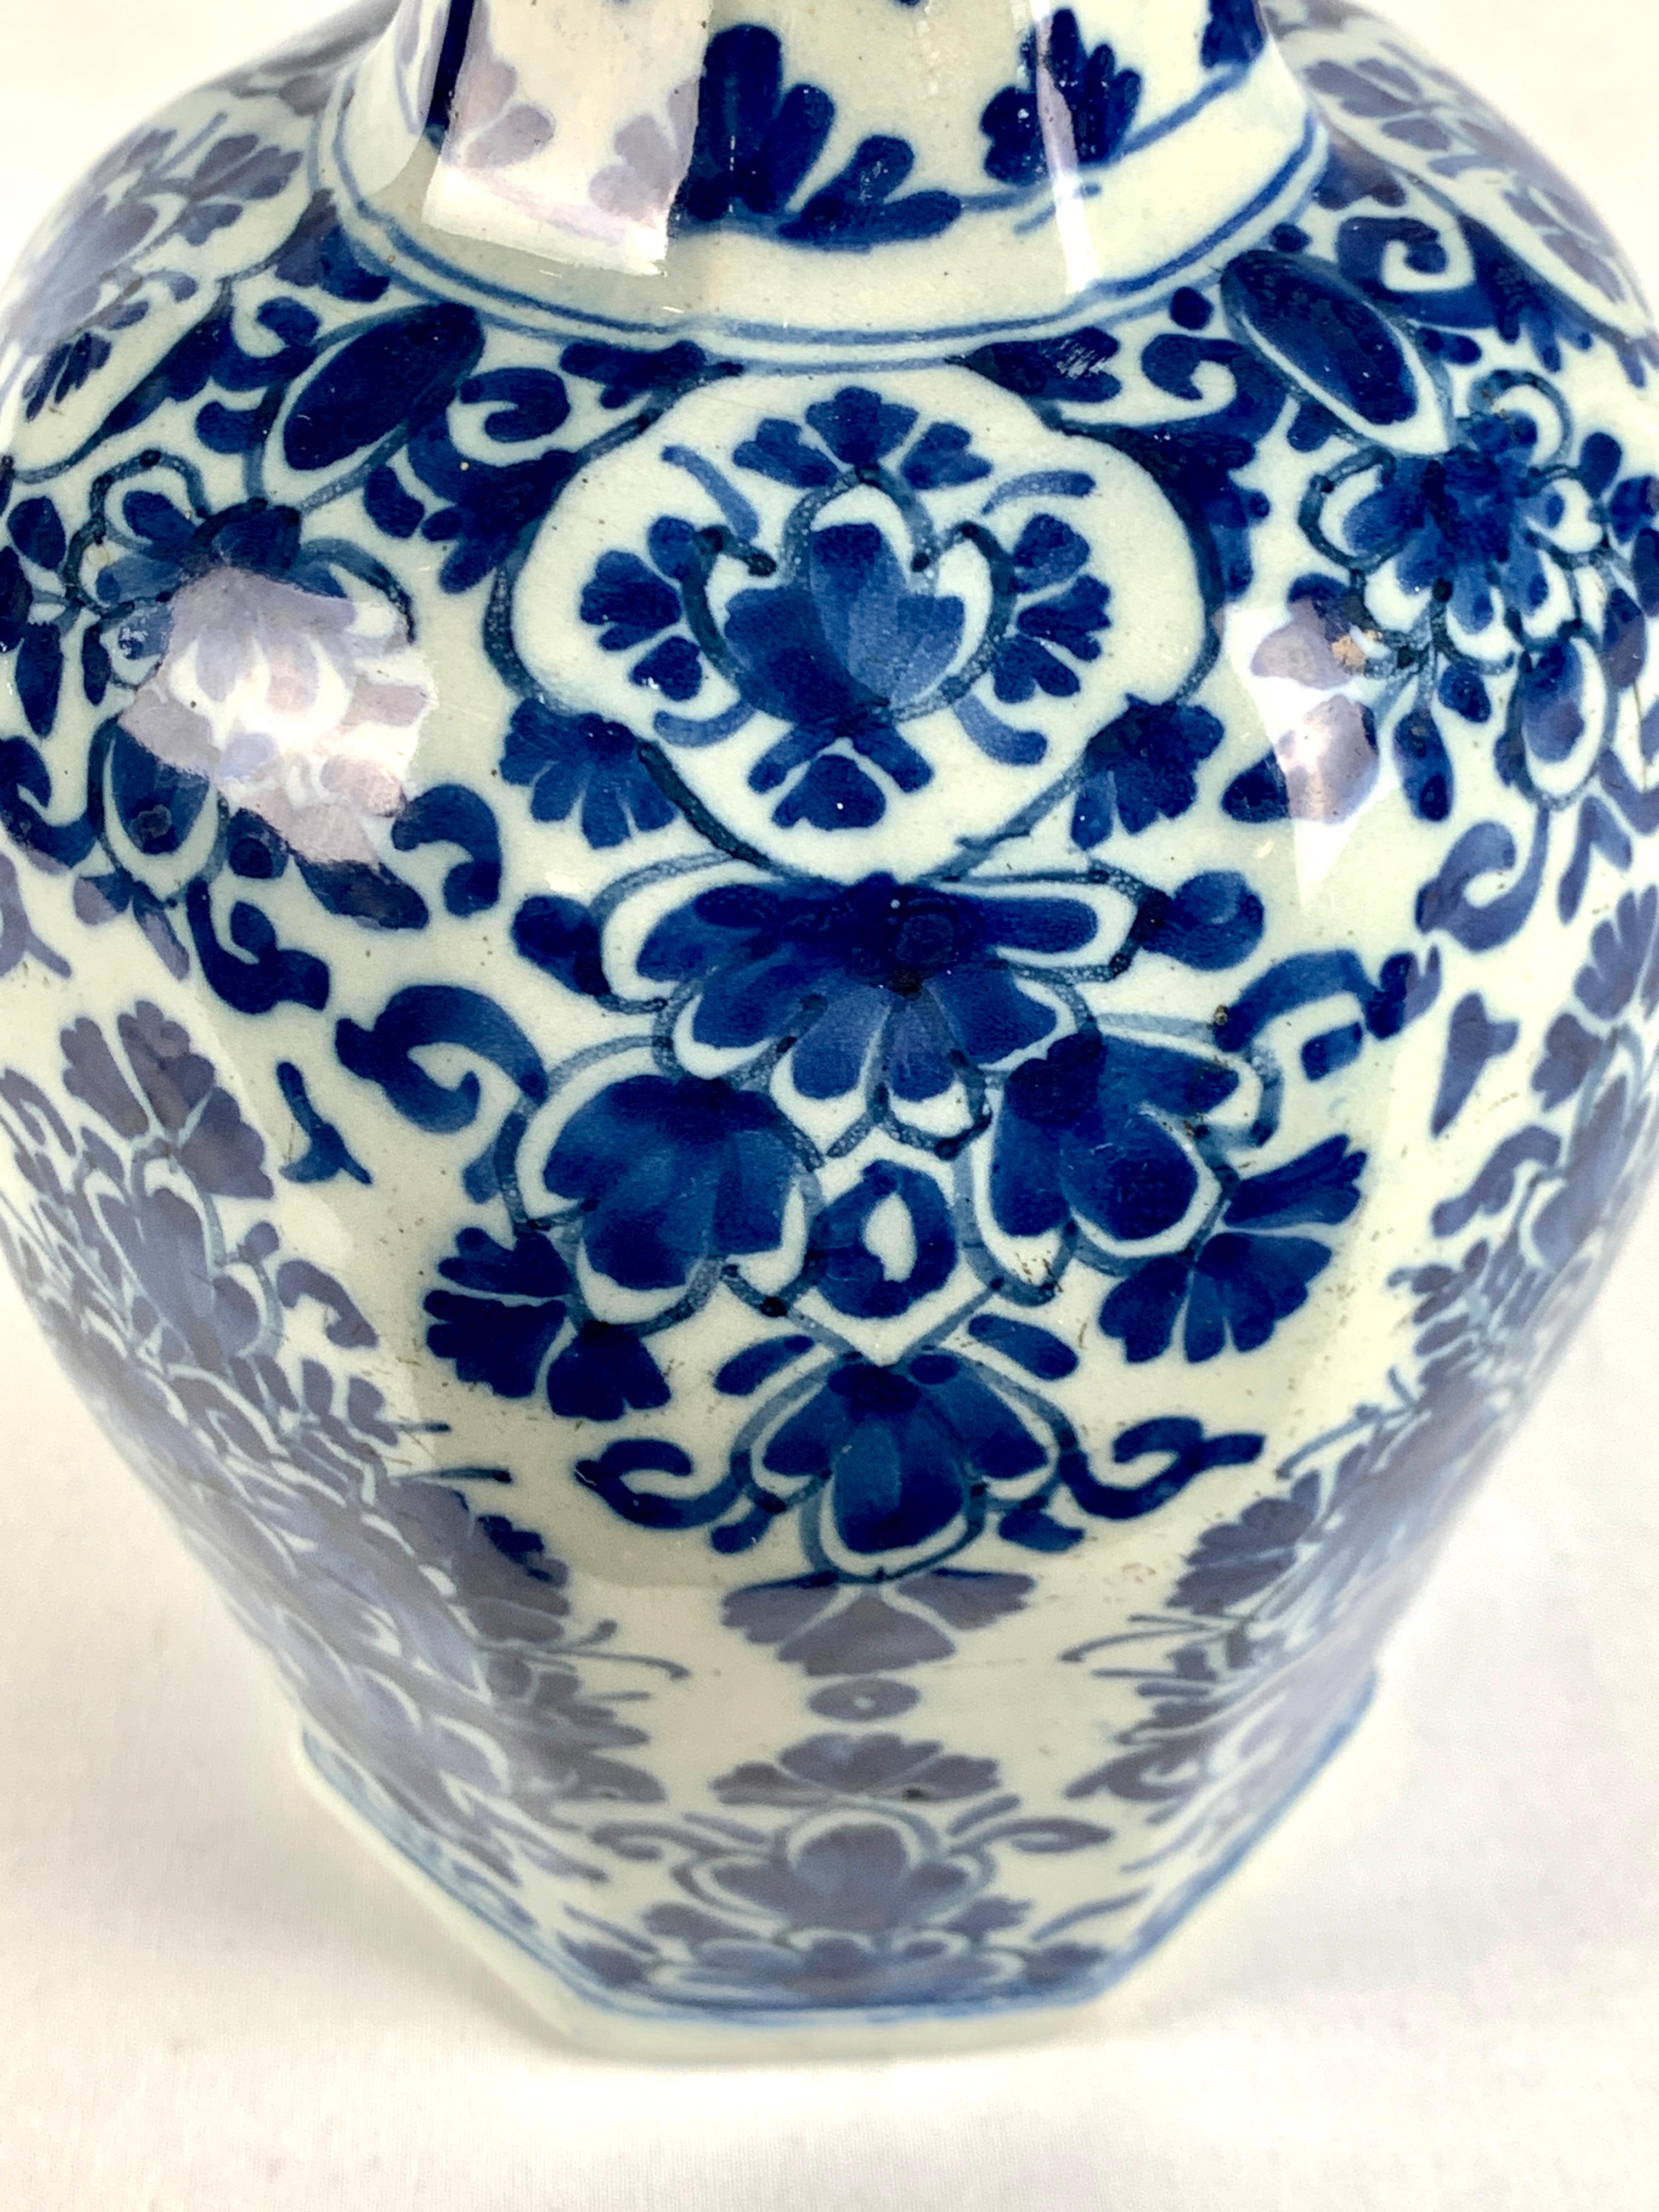 Rococo Delft Blue and White Vase Hand Painted 18th Century circa 1780 Netherlands For Sale